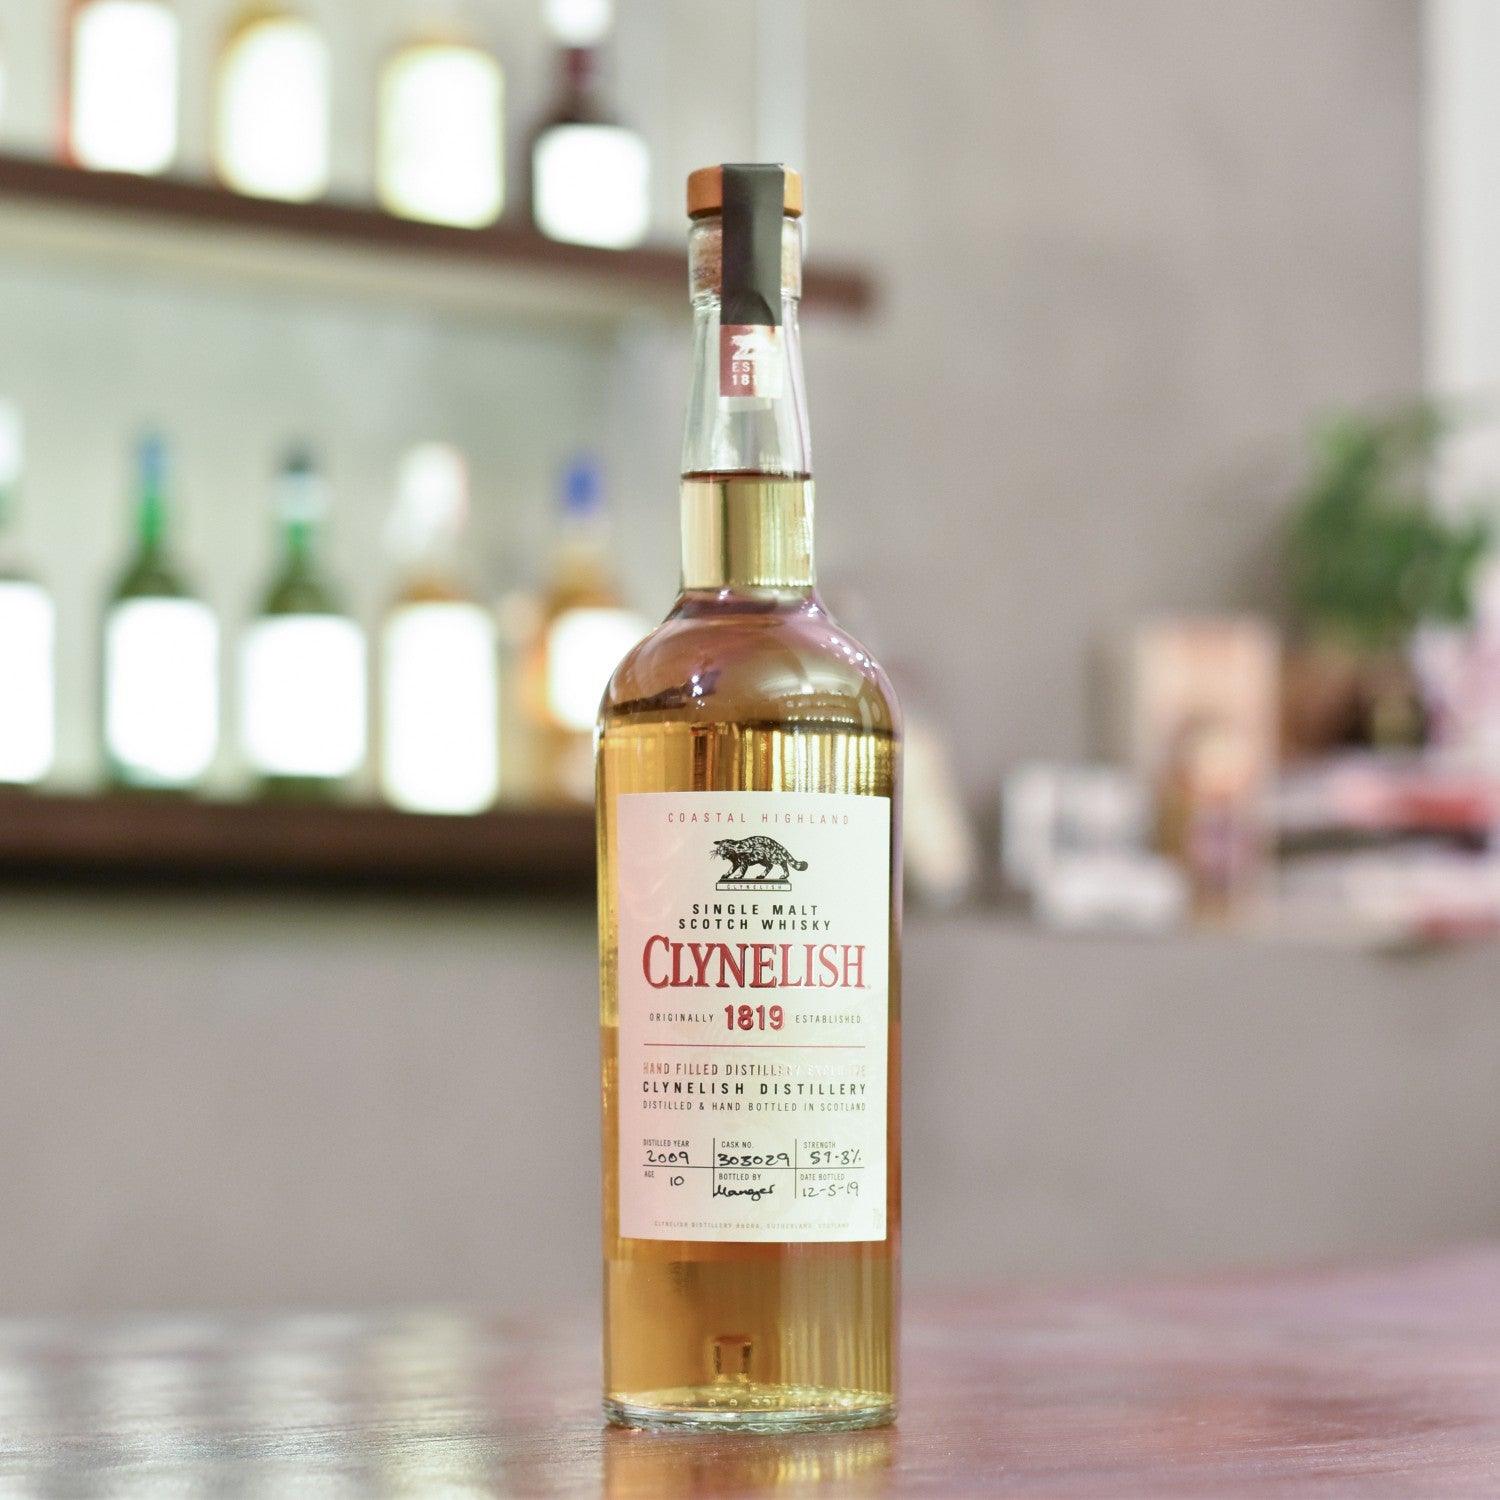 Clynelish 10 Year Old 2009 Hand-filled Cask 303029 - The Rare Malt